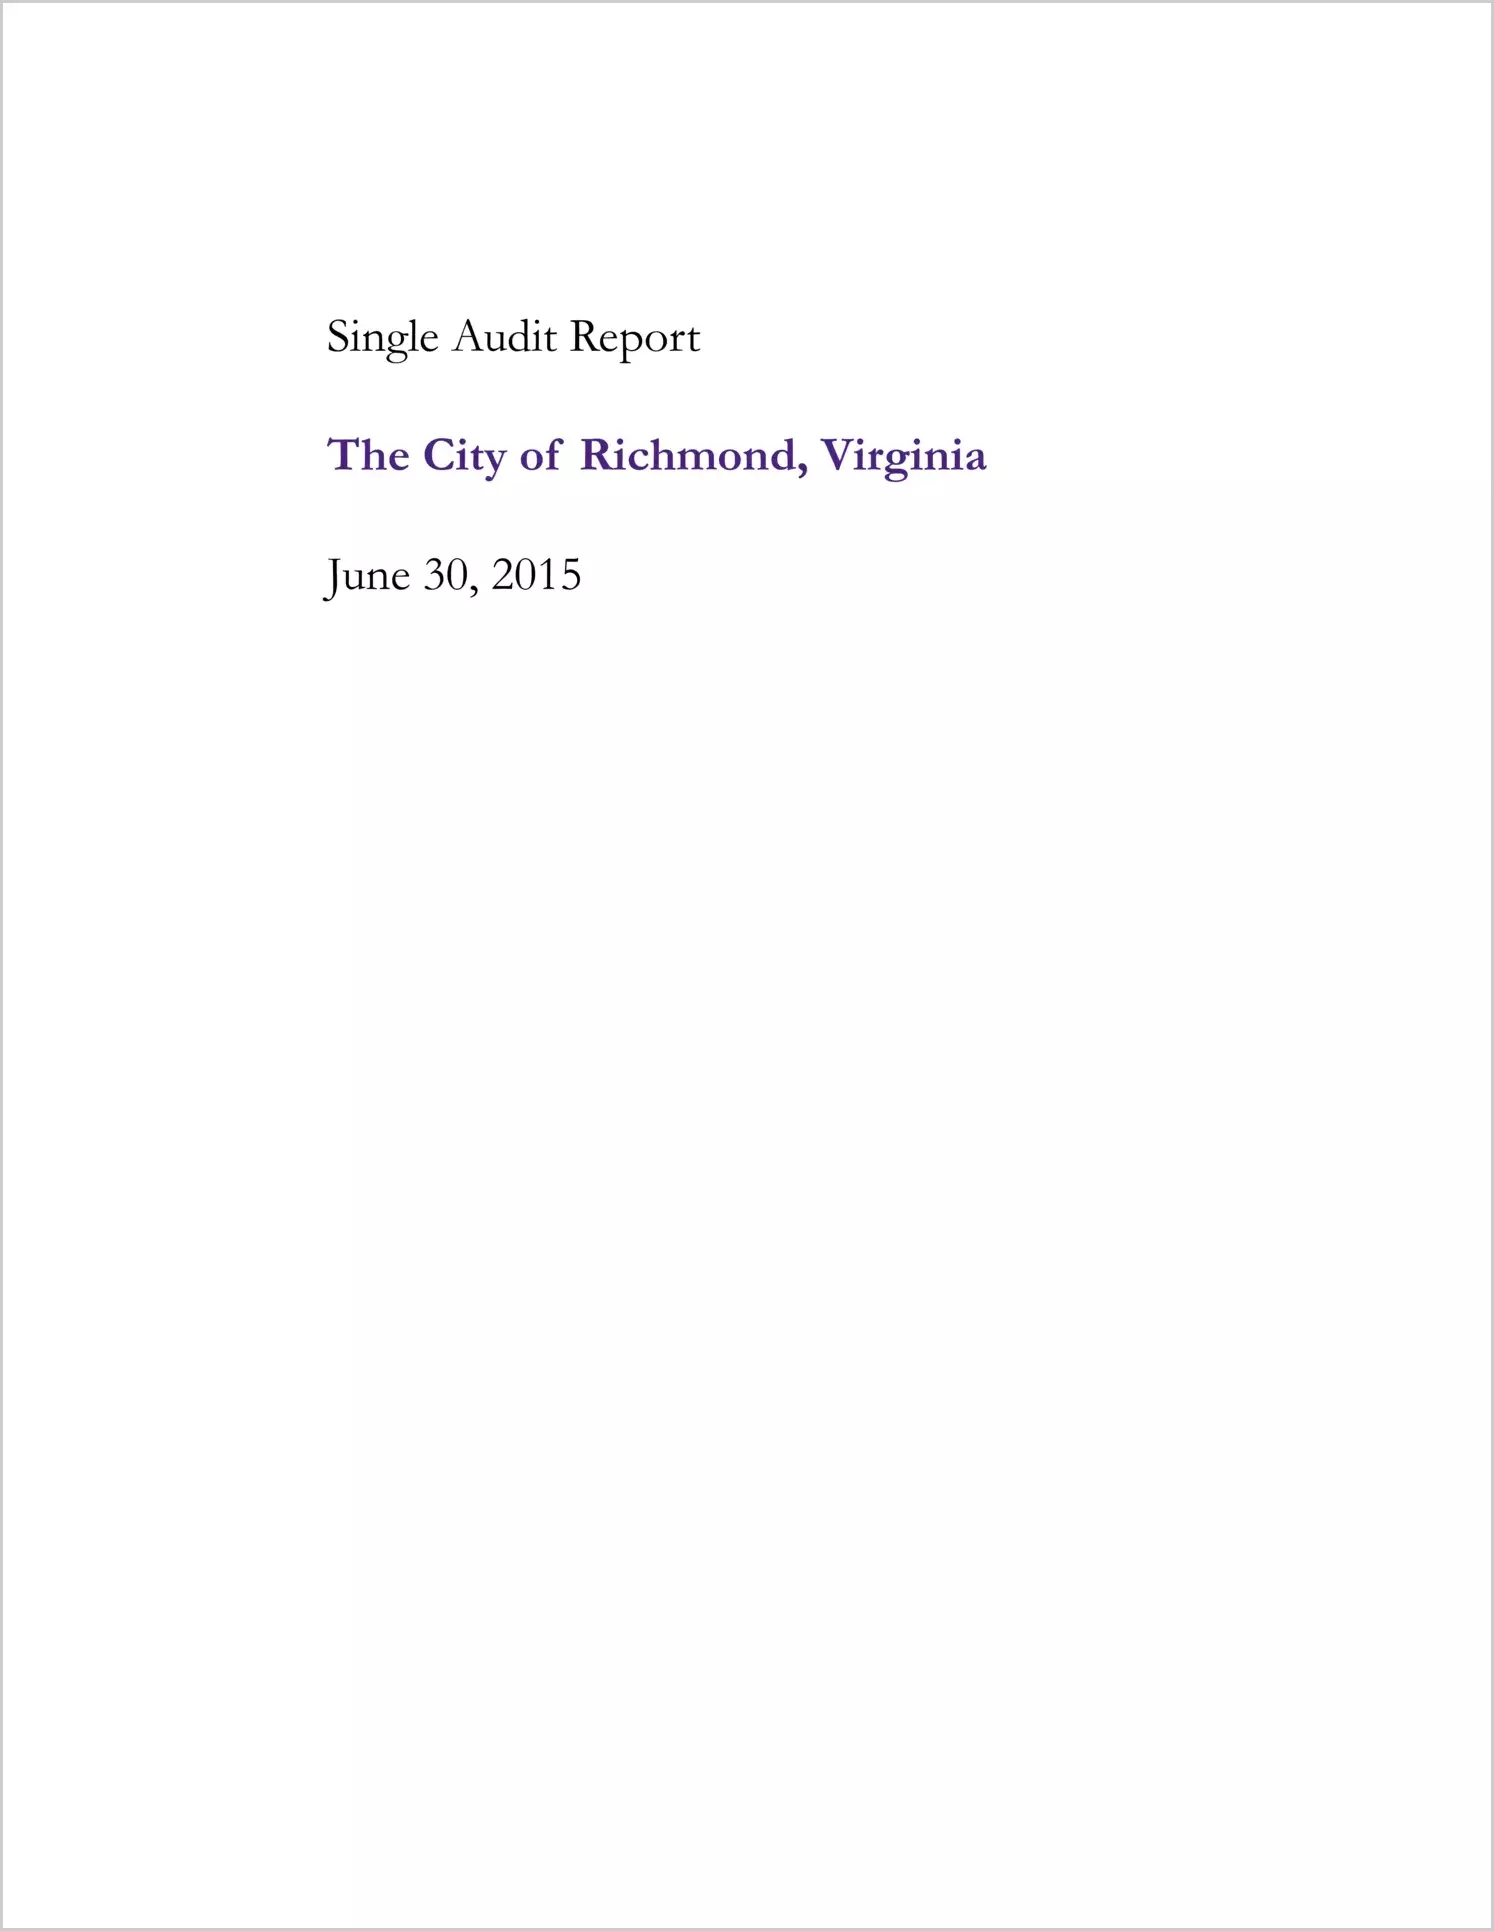 2015 Internal Control and Compliance Report for City of Richmond